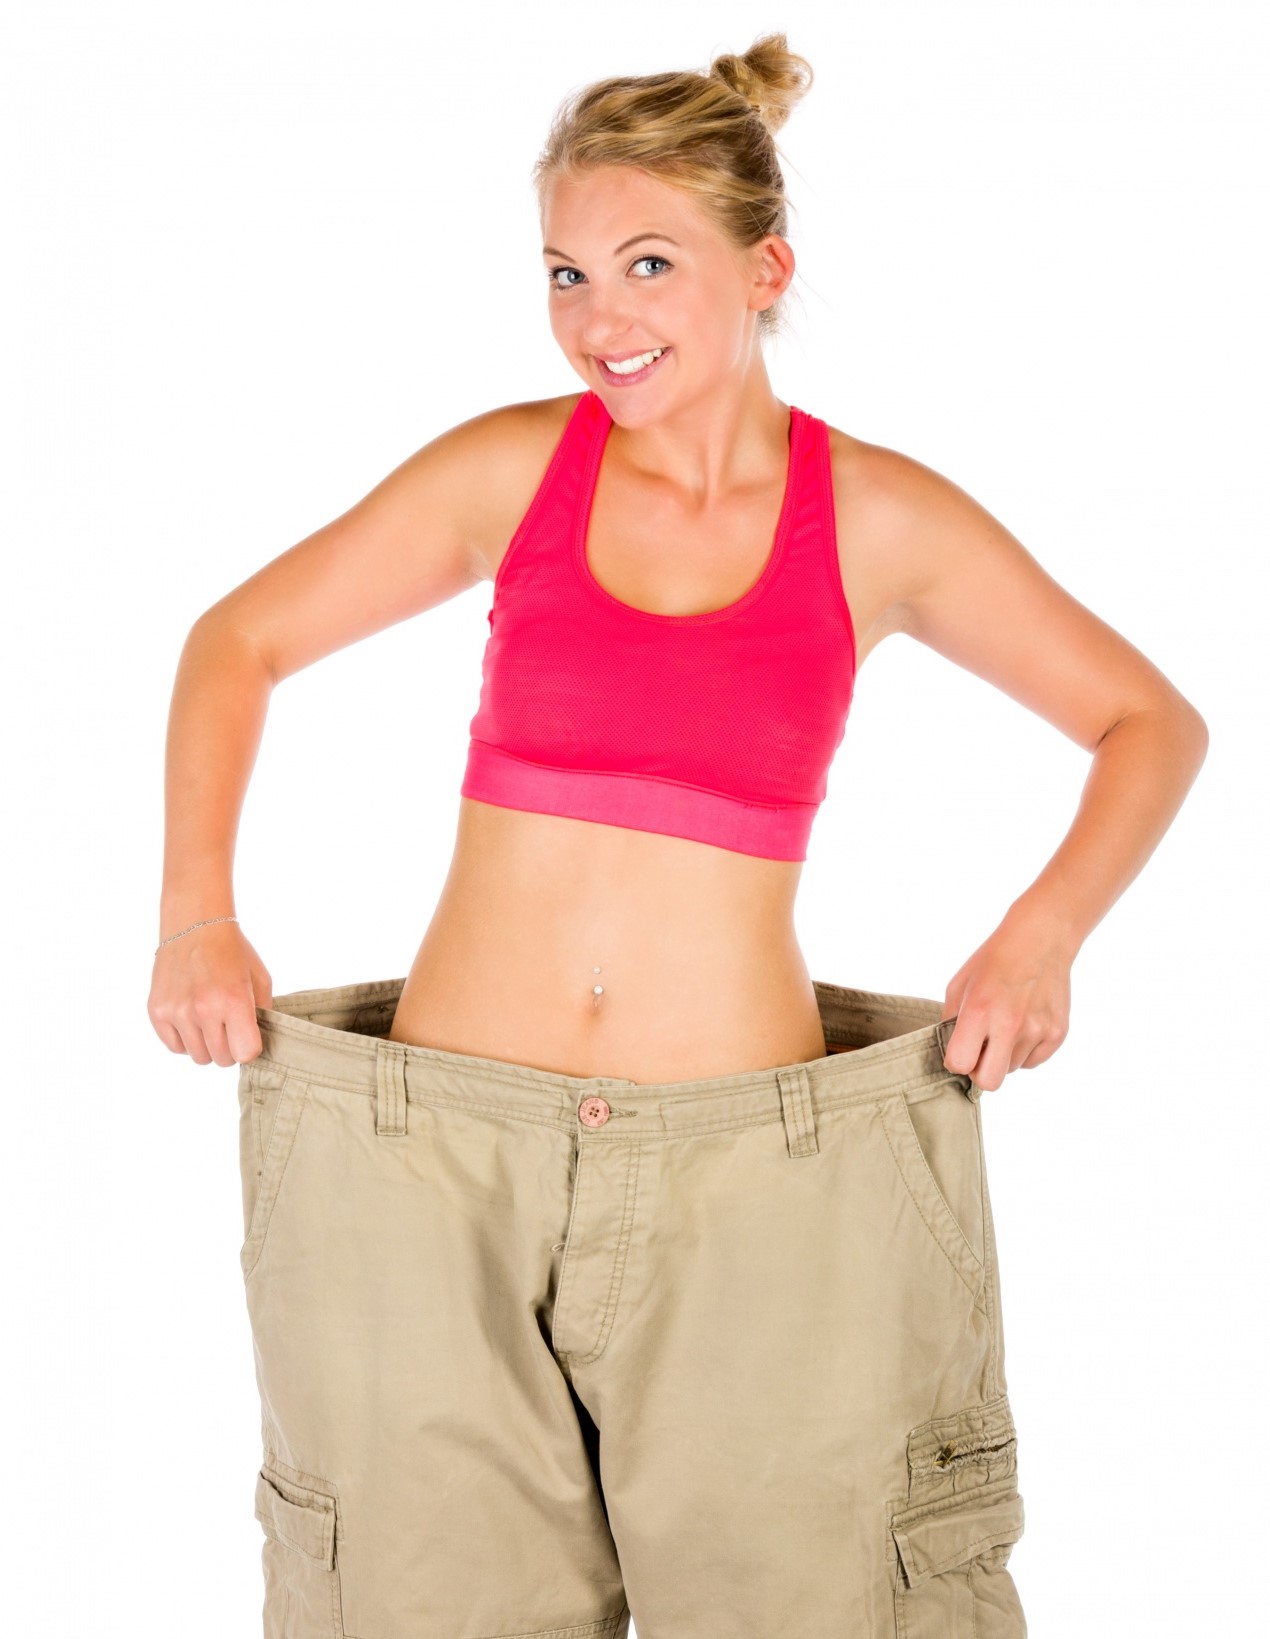 Most Common Weight Loss Myths Debunked - Odd Culture